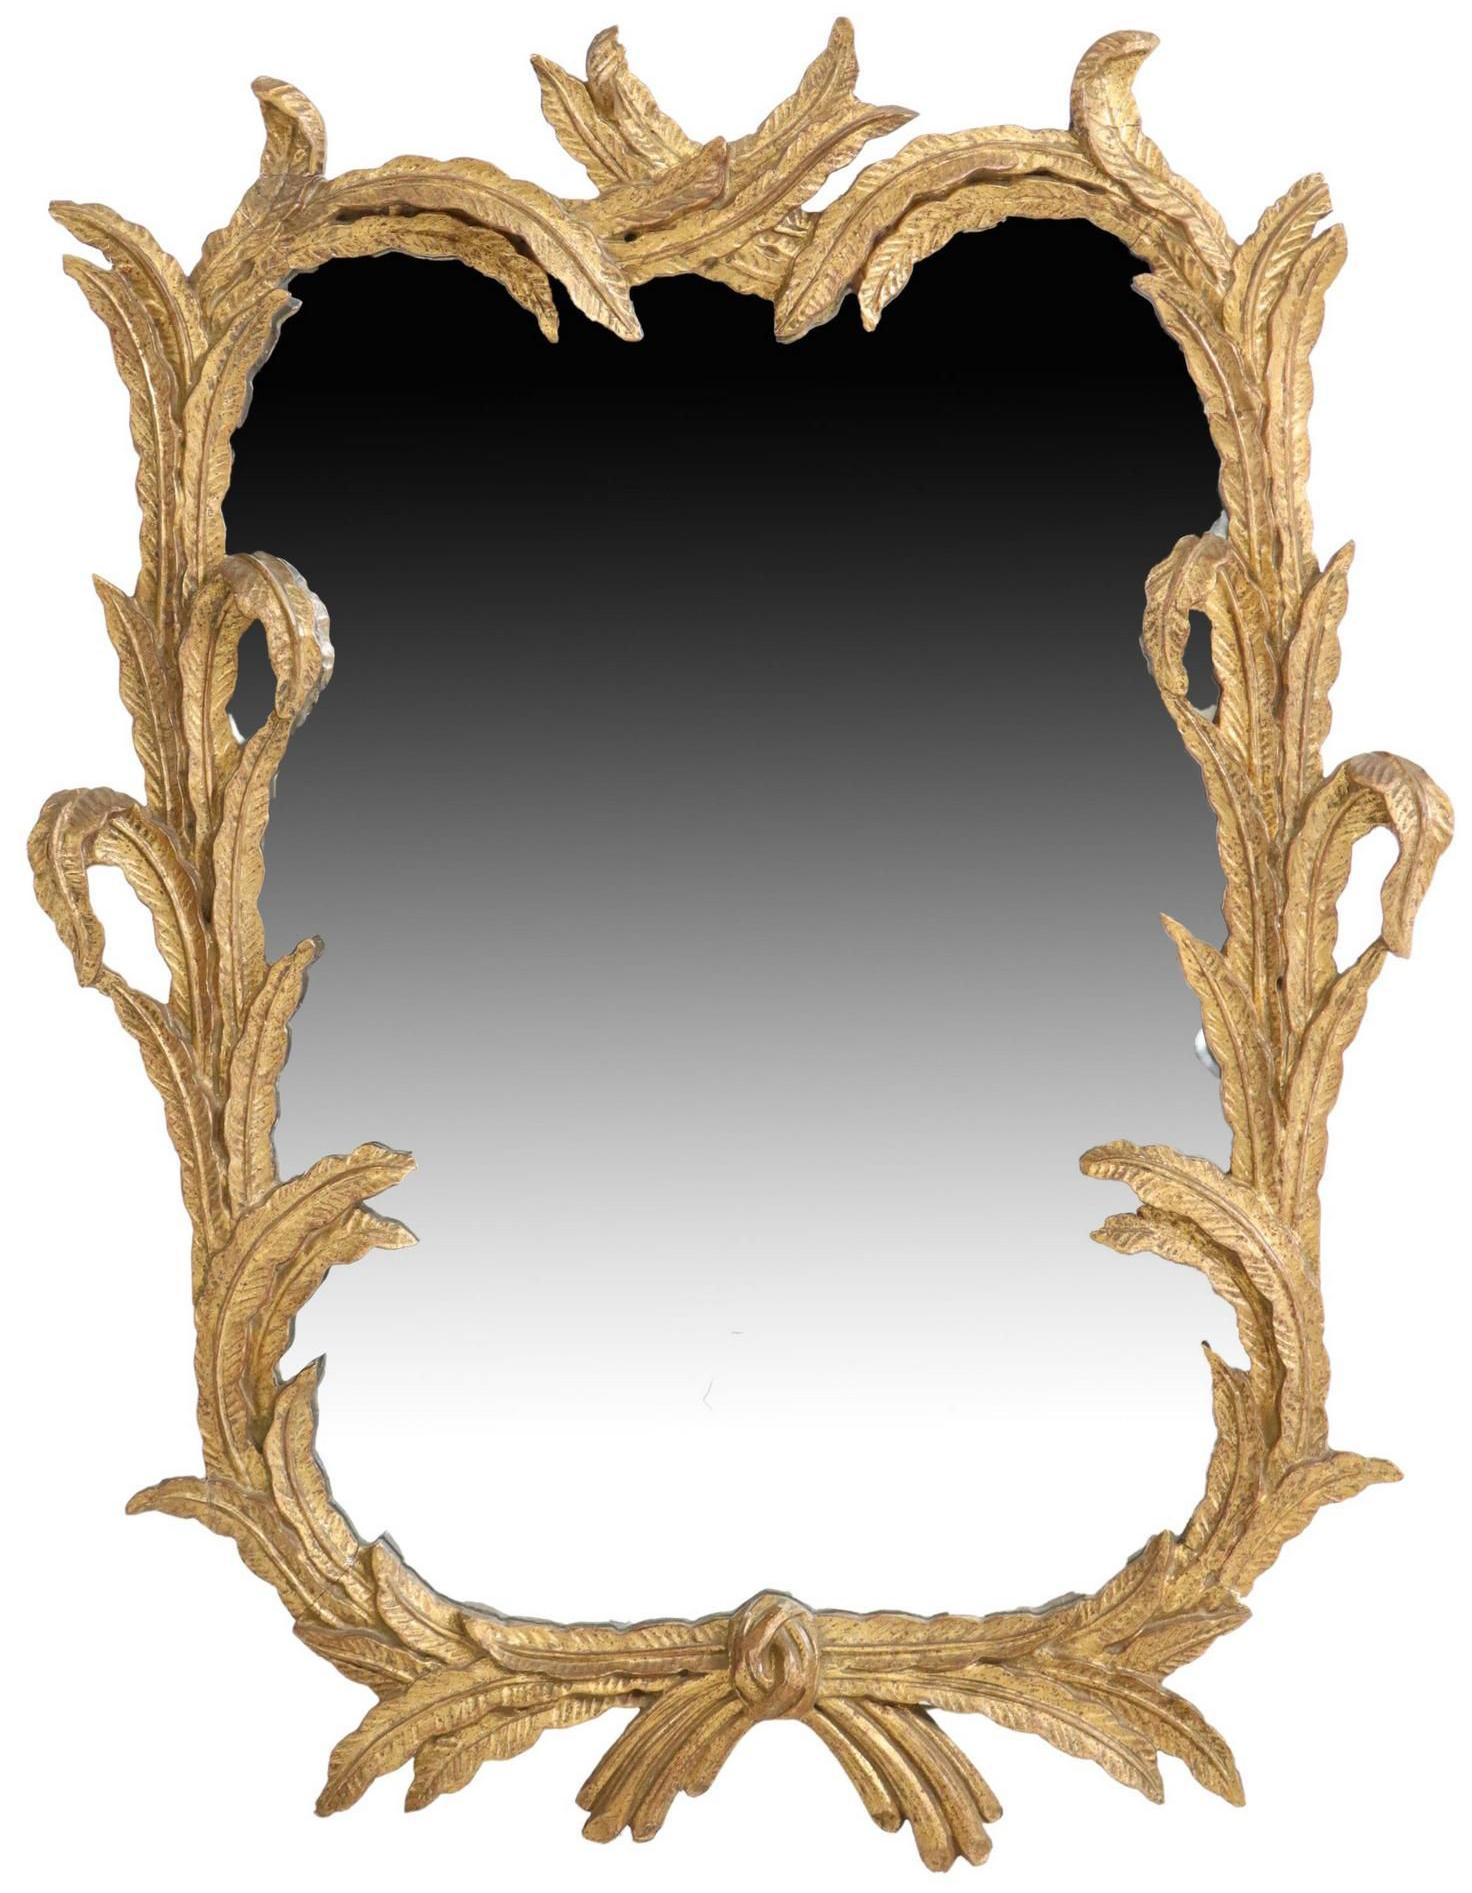 Antique Italian gilt carved wood wall mirror, early 20thc., having foliate frame, encasing flat mirror plate.

Dimensions
approx 37.75